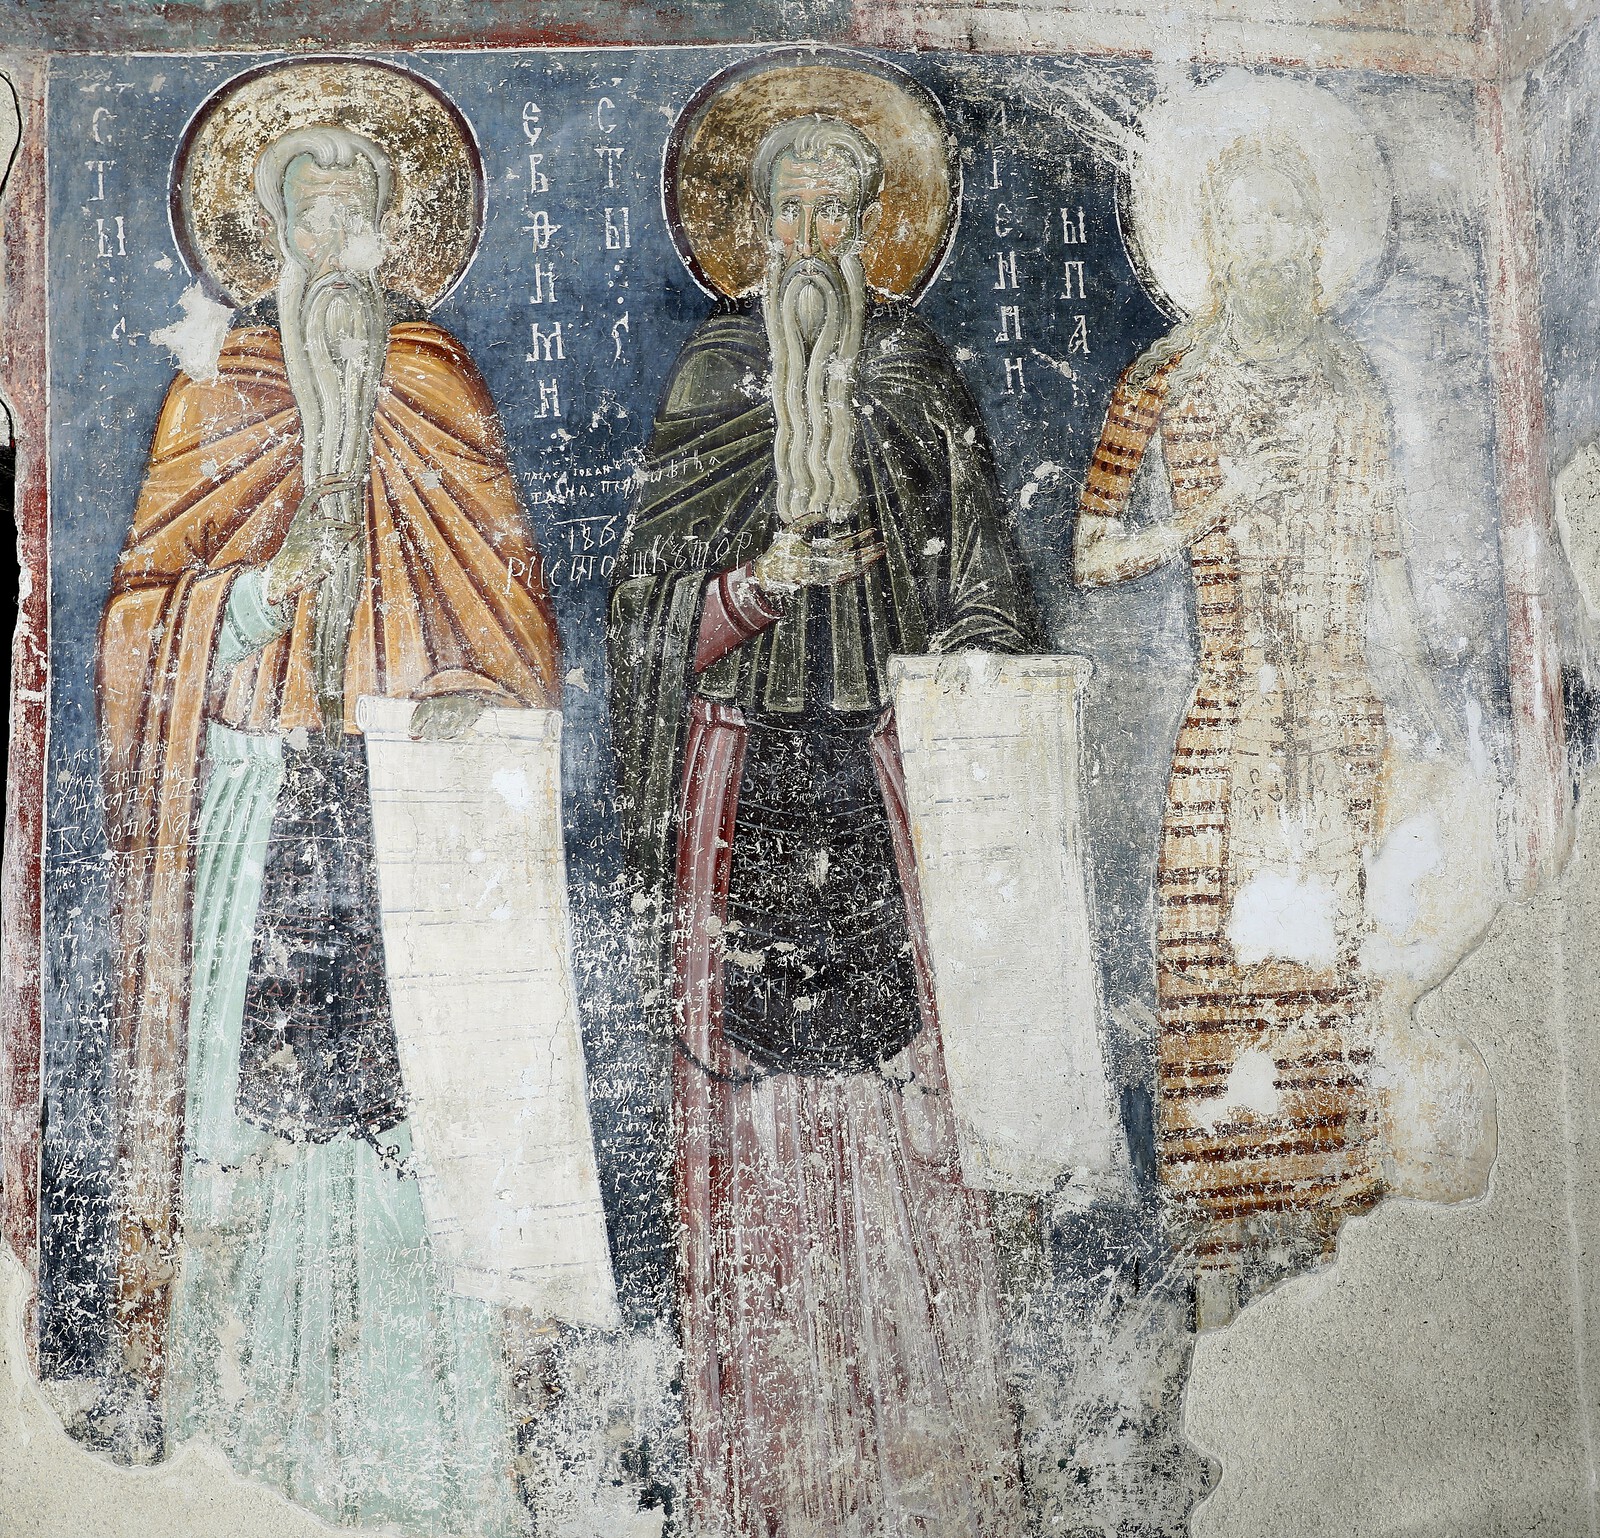 Sts. Euthymius, Arsenius and Paul of Thebes